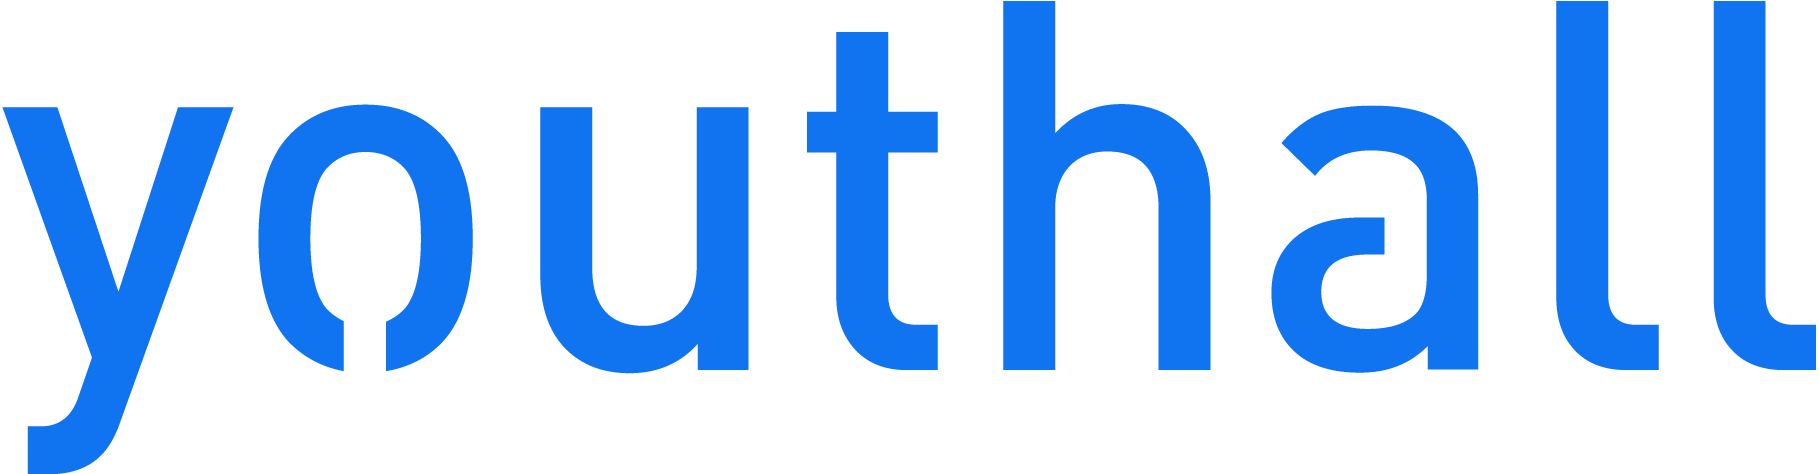 Youthall Logo Forget Password